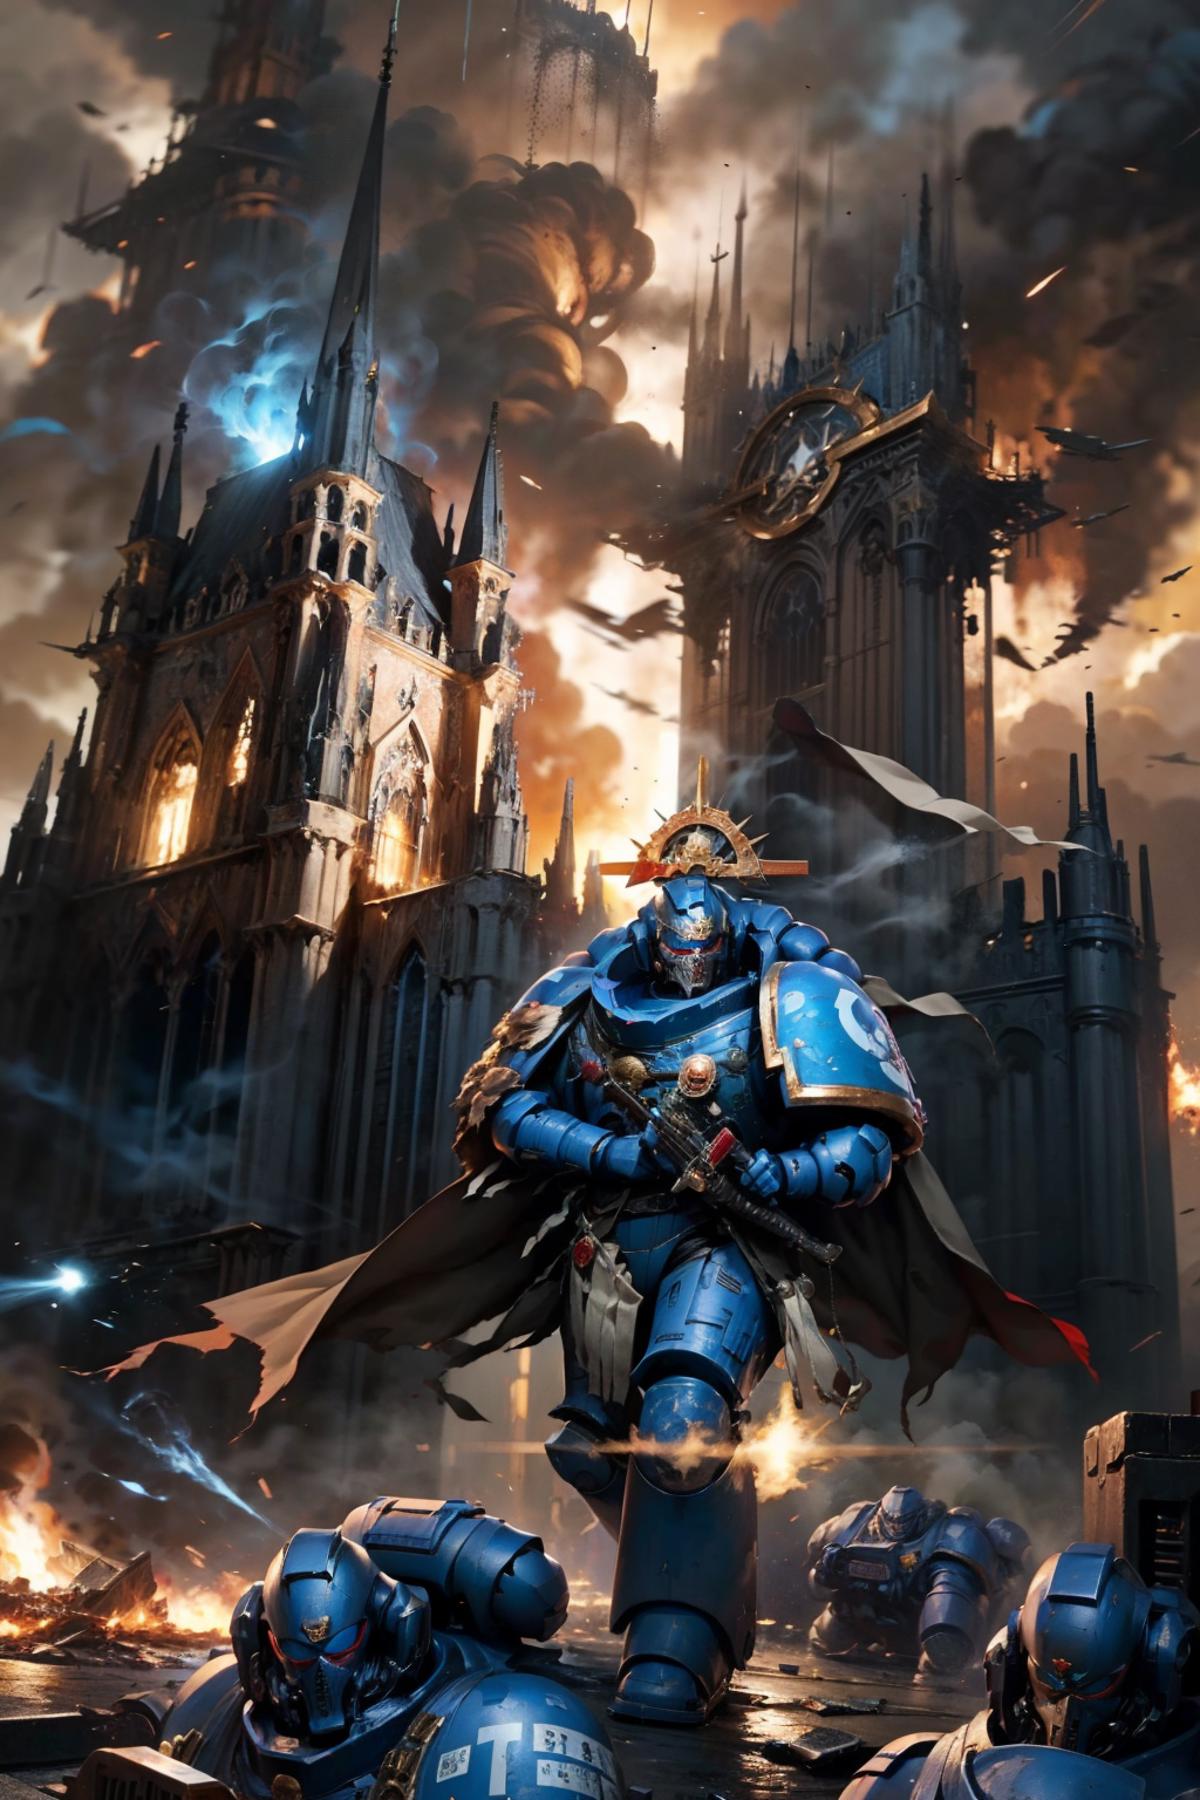 The Ultramarines image by ccaraxess